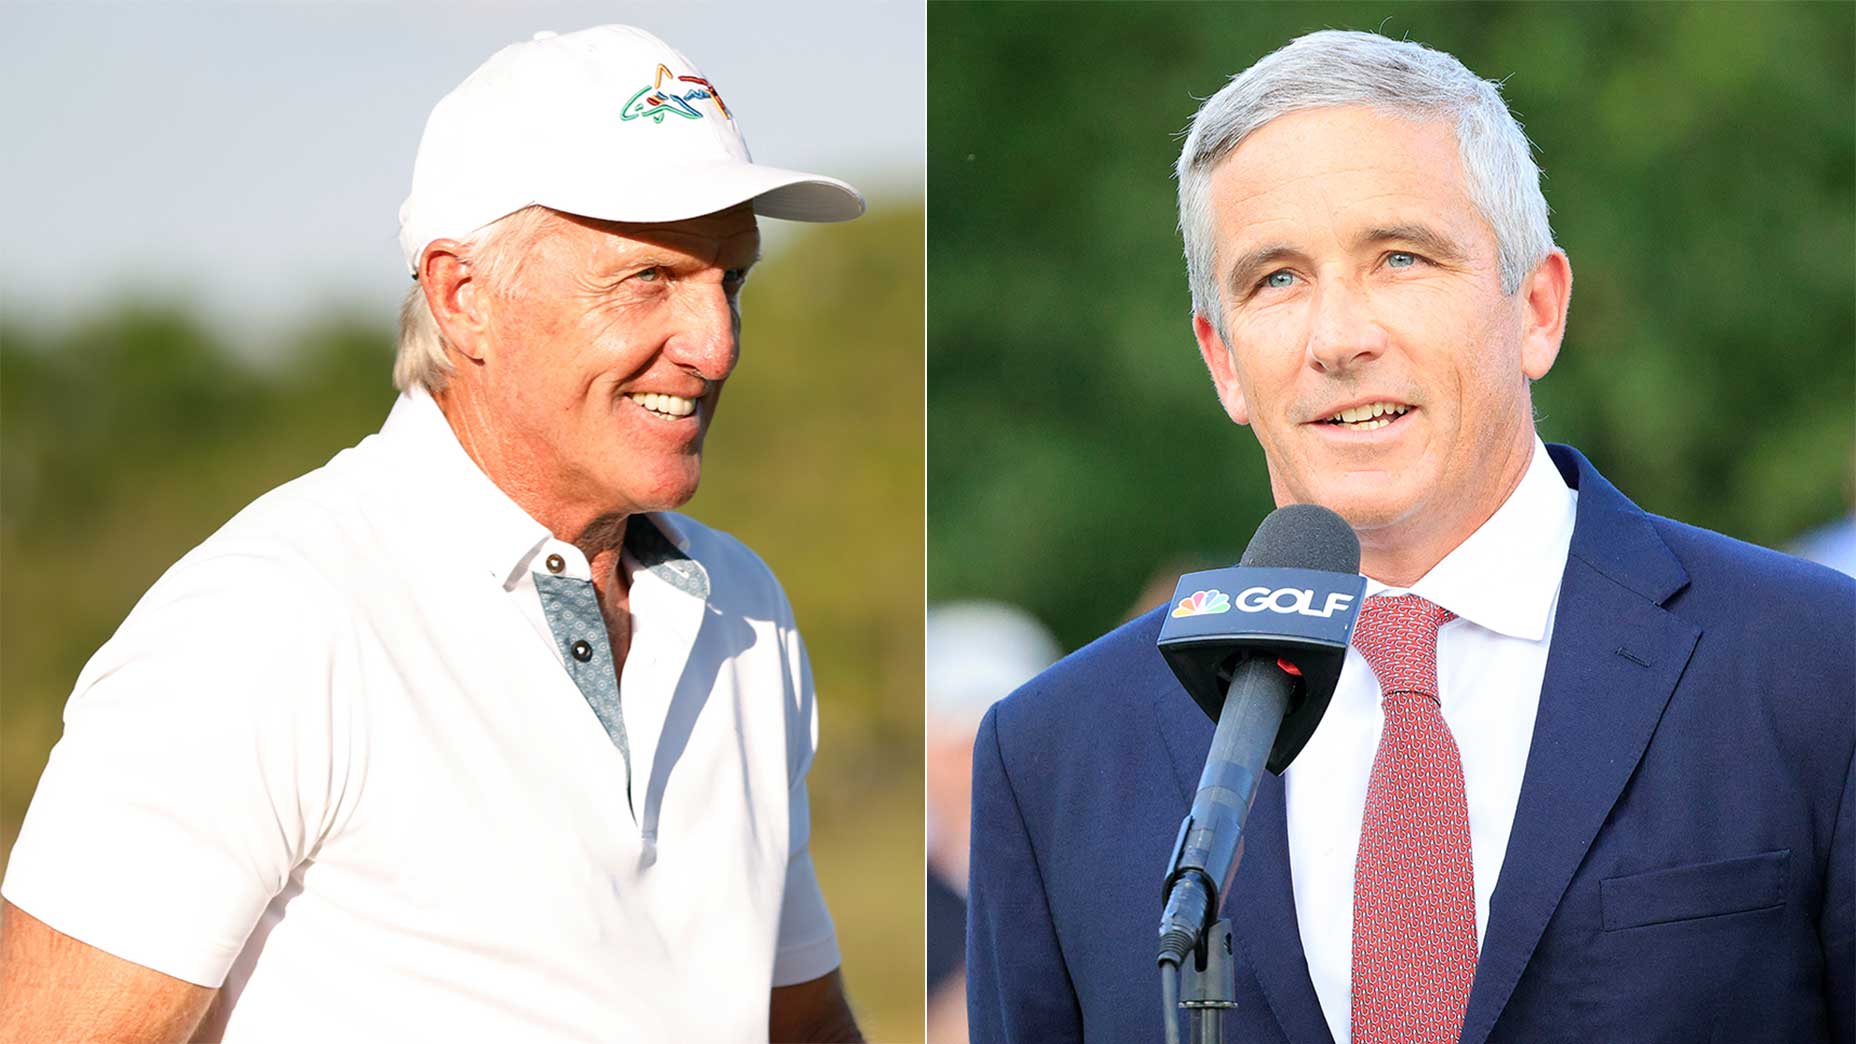 LIV Golf CEO Greg Norman and PGA Tour Commissioner Jay Monahan appear to have their organizations on a collision course.